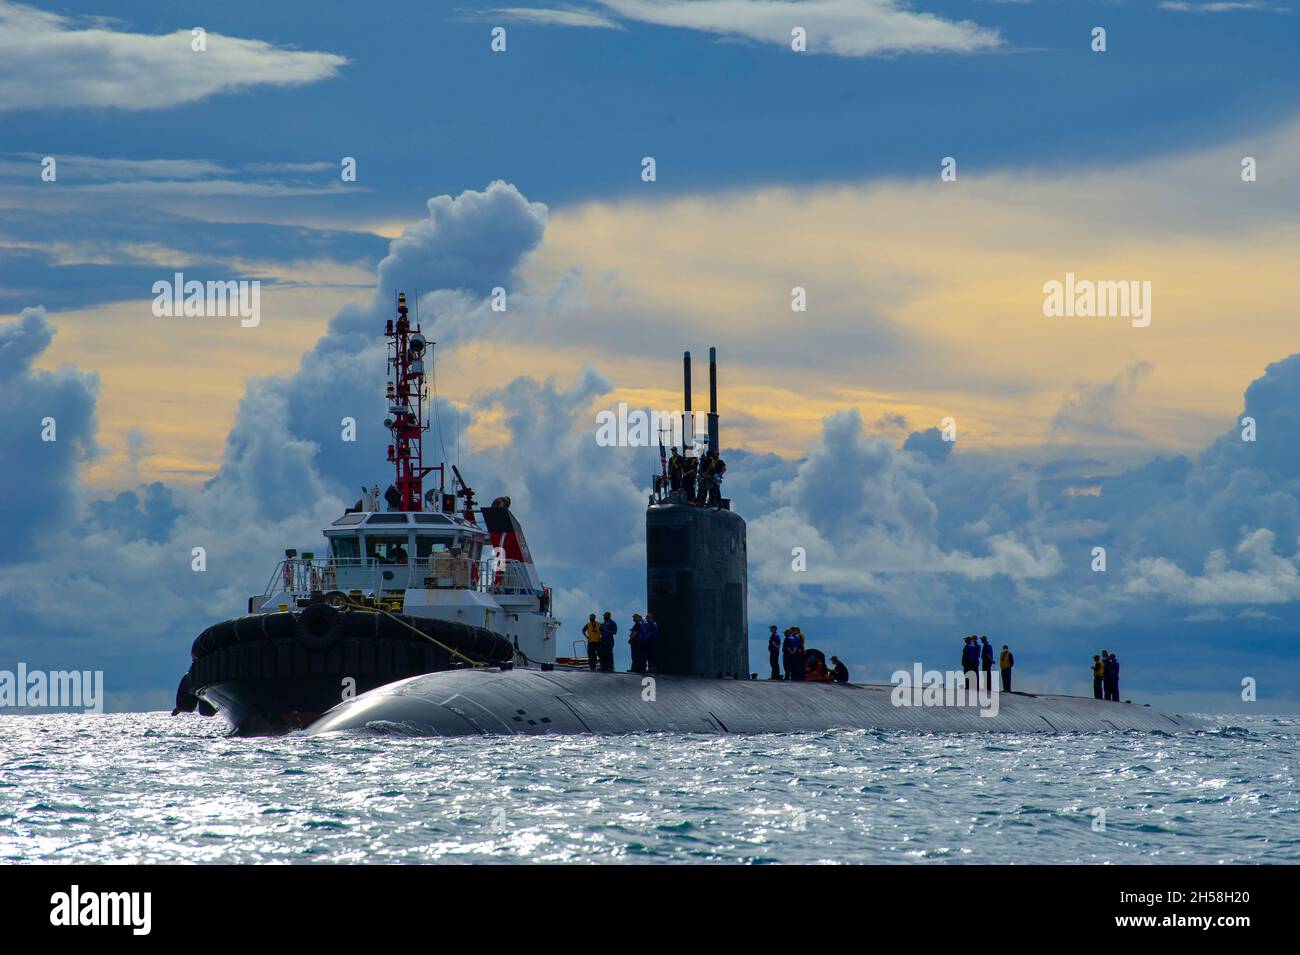 Saipan, United States. 21 October, 2021. The U.S. Navy Los Angeles-class fast attack submarine USS Hampton is assisted by a tug boat to moor at the submarine tender USS Frank Cable for resupply October 21, 2021 in Saipan, Northern Mariana Islands.  Credit: MC2 Chase Stephens/U.S. Navy/Alamy Live News Stock Photo